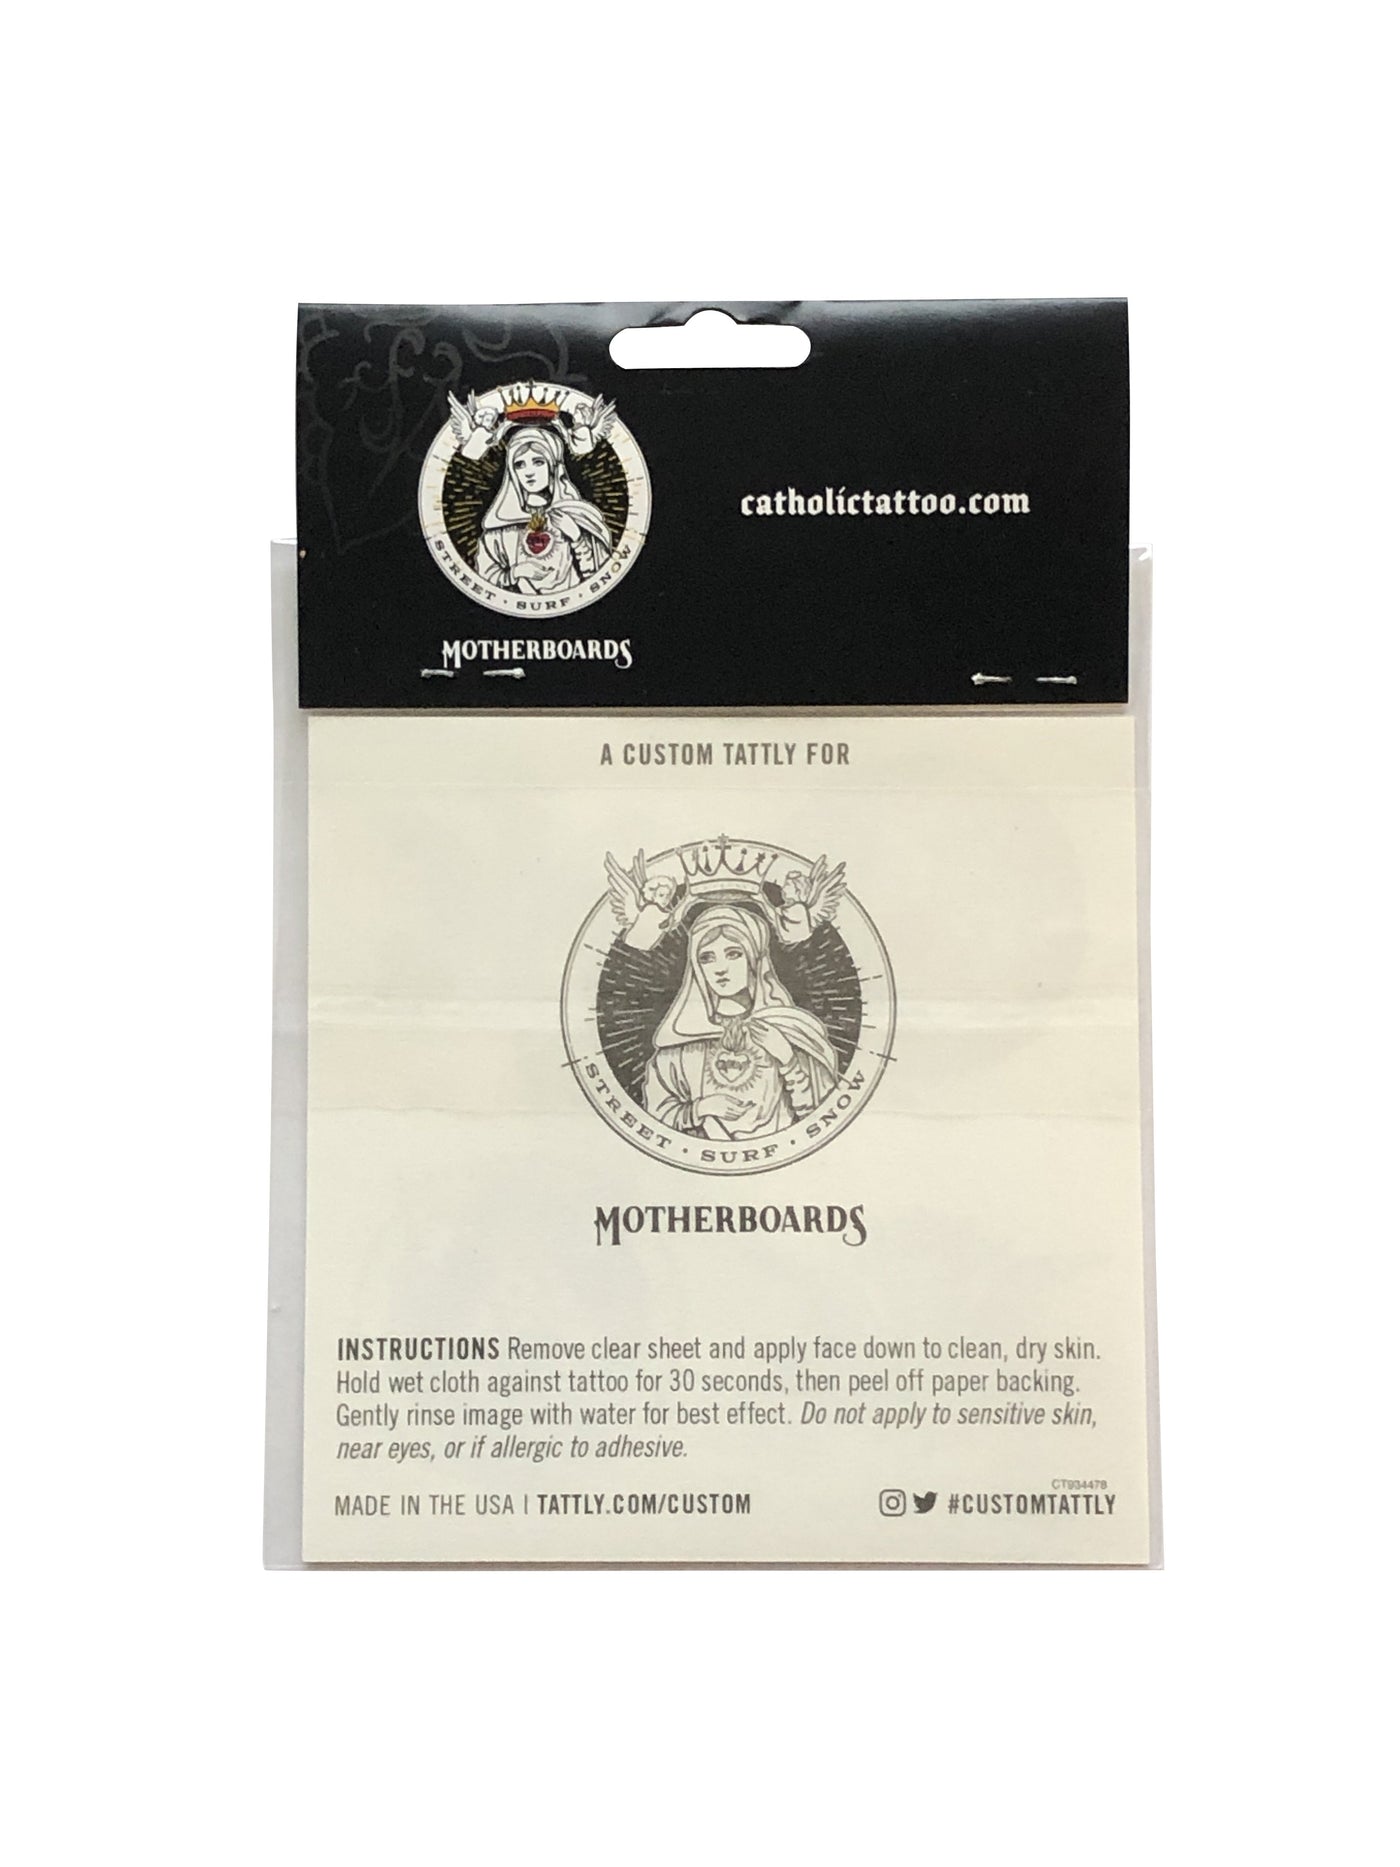 Ave Maria Temporary Tattoos, Made in the USA